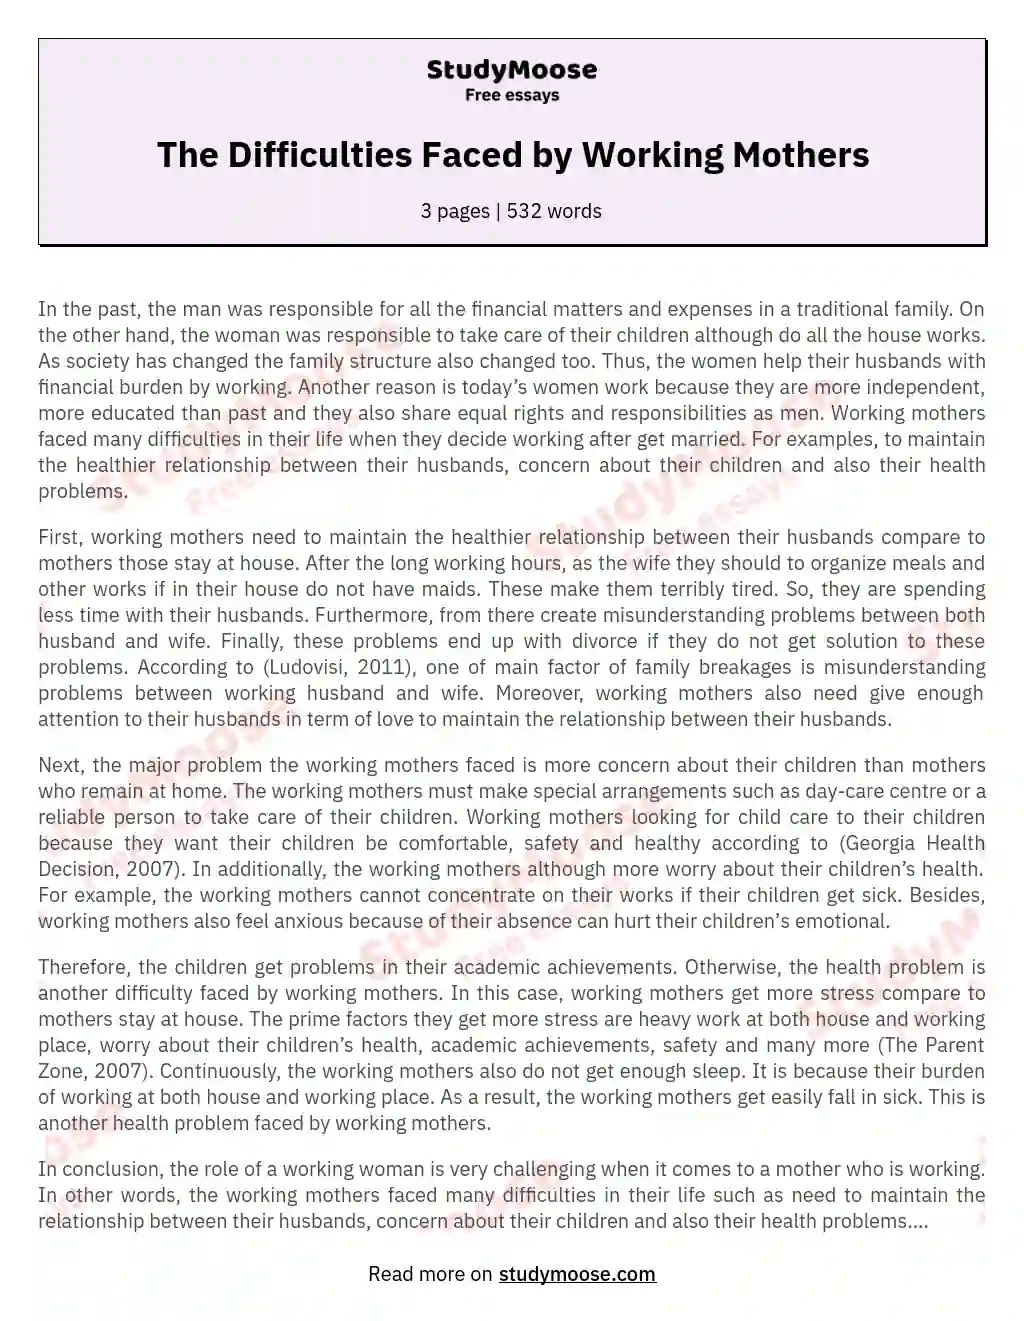 The Difficulties Faced by Working Mothers essay